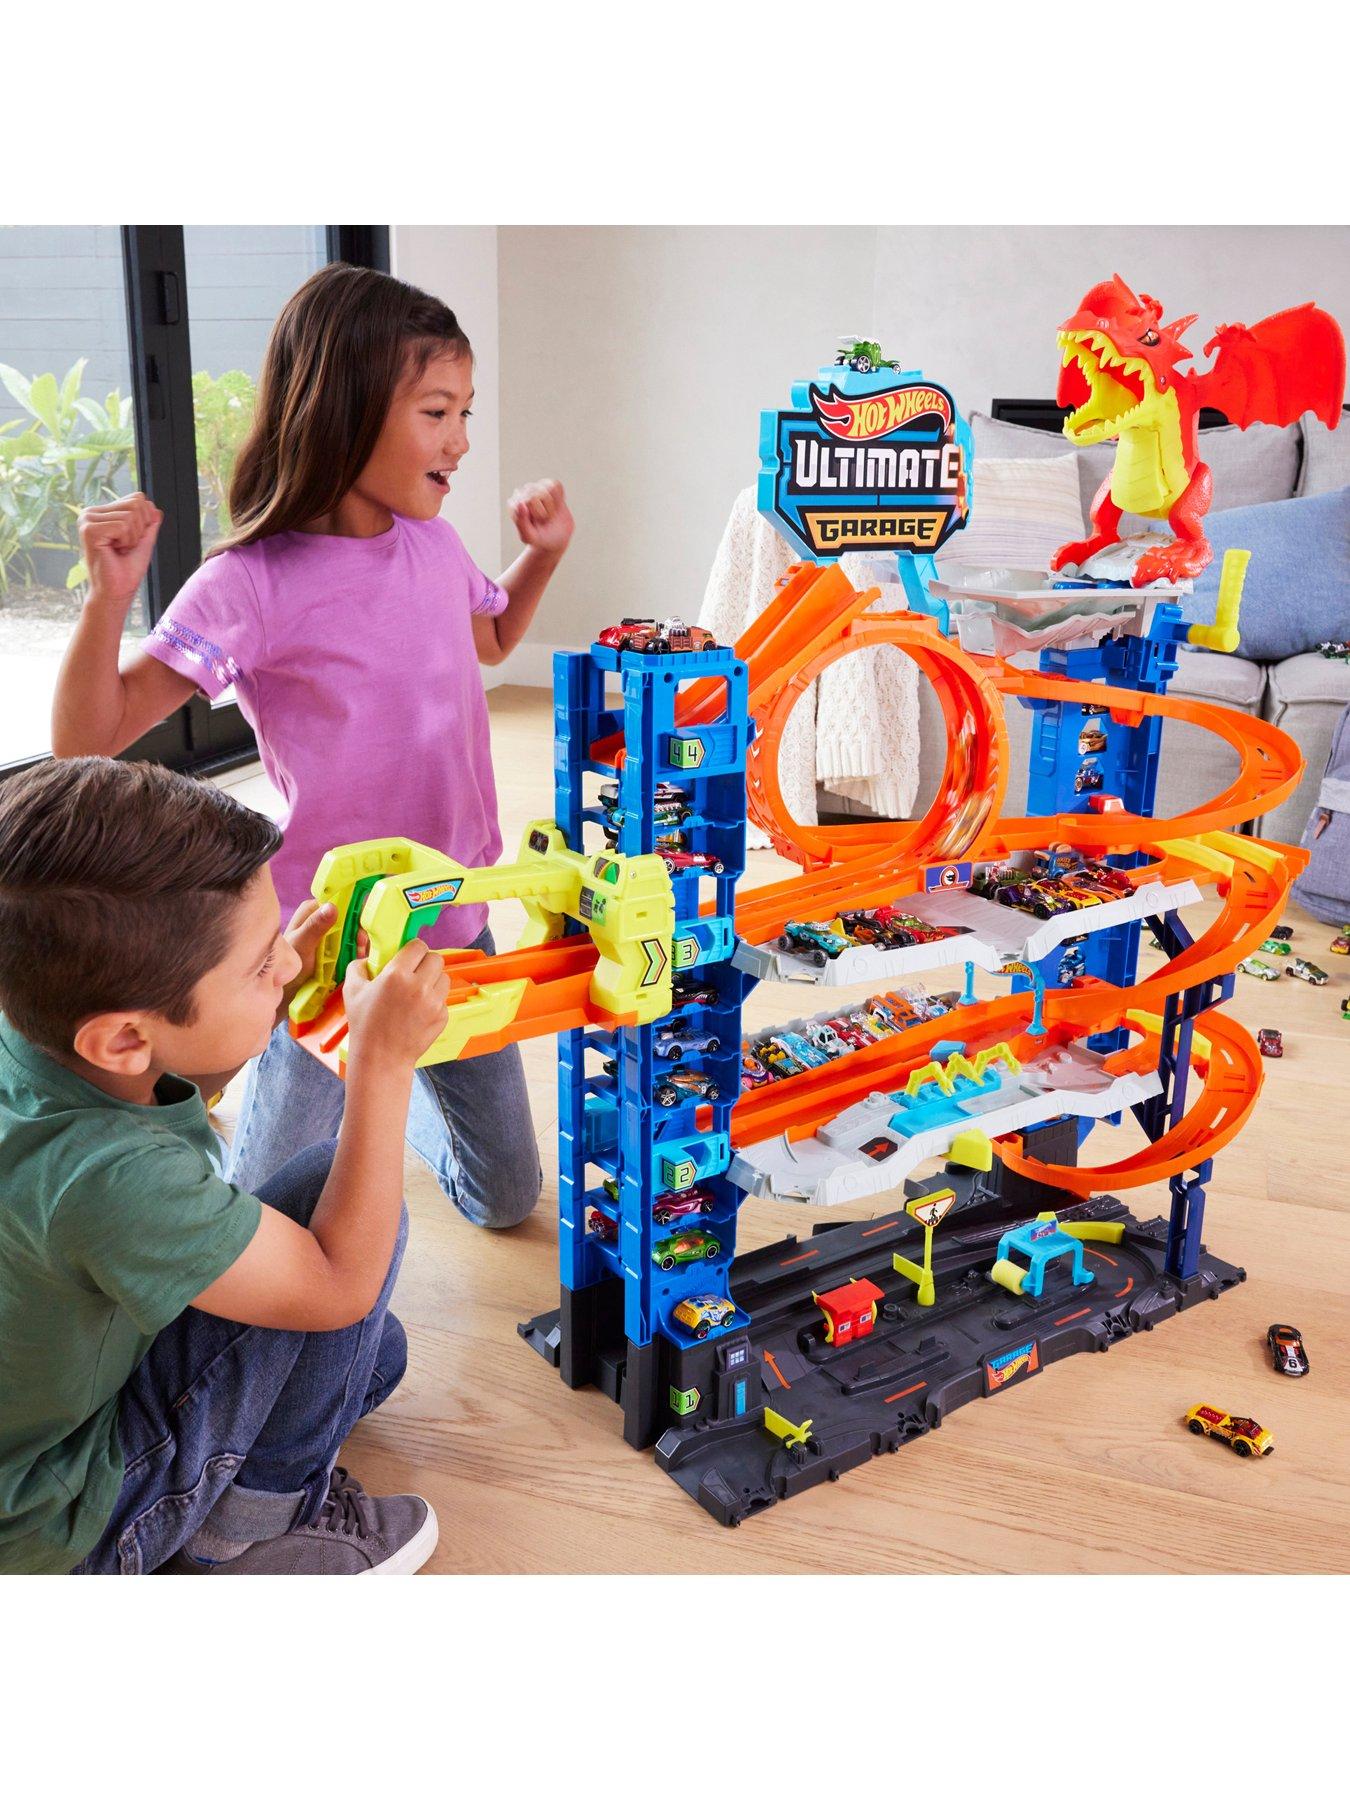 Hot Wheels City Mega Garage Playset with Storage for Over 60 Cars, Ages 4+